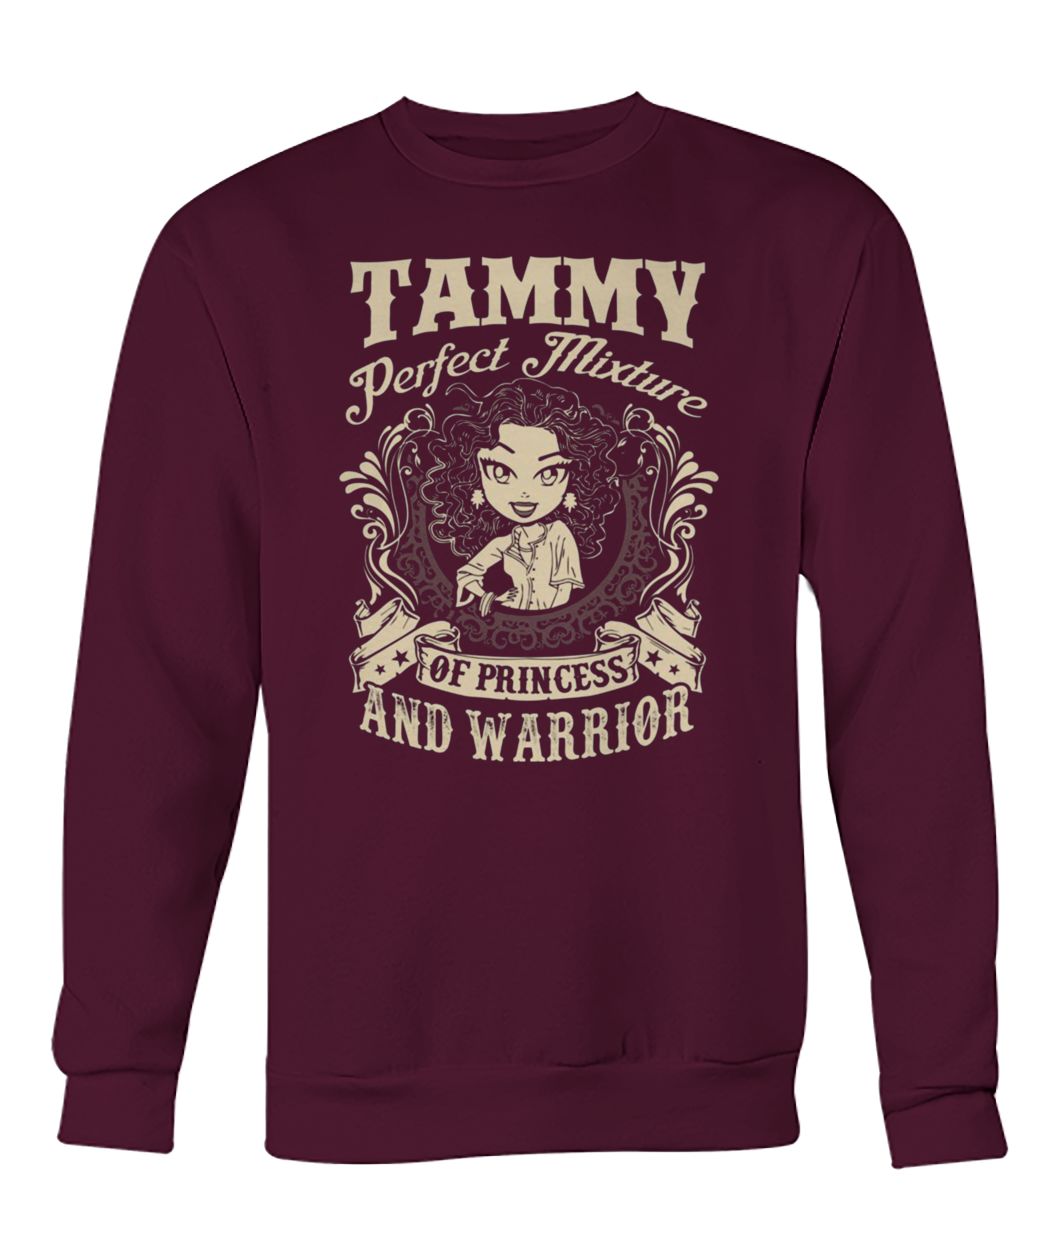 Tammy perfect combination of a princess and warrior crew neck sweatshirt